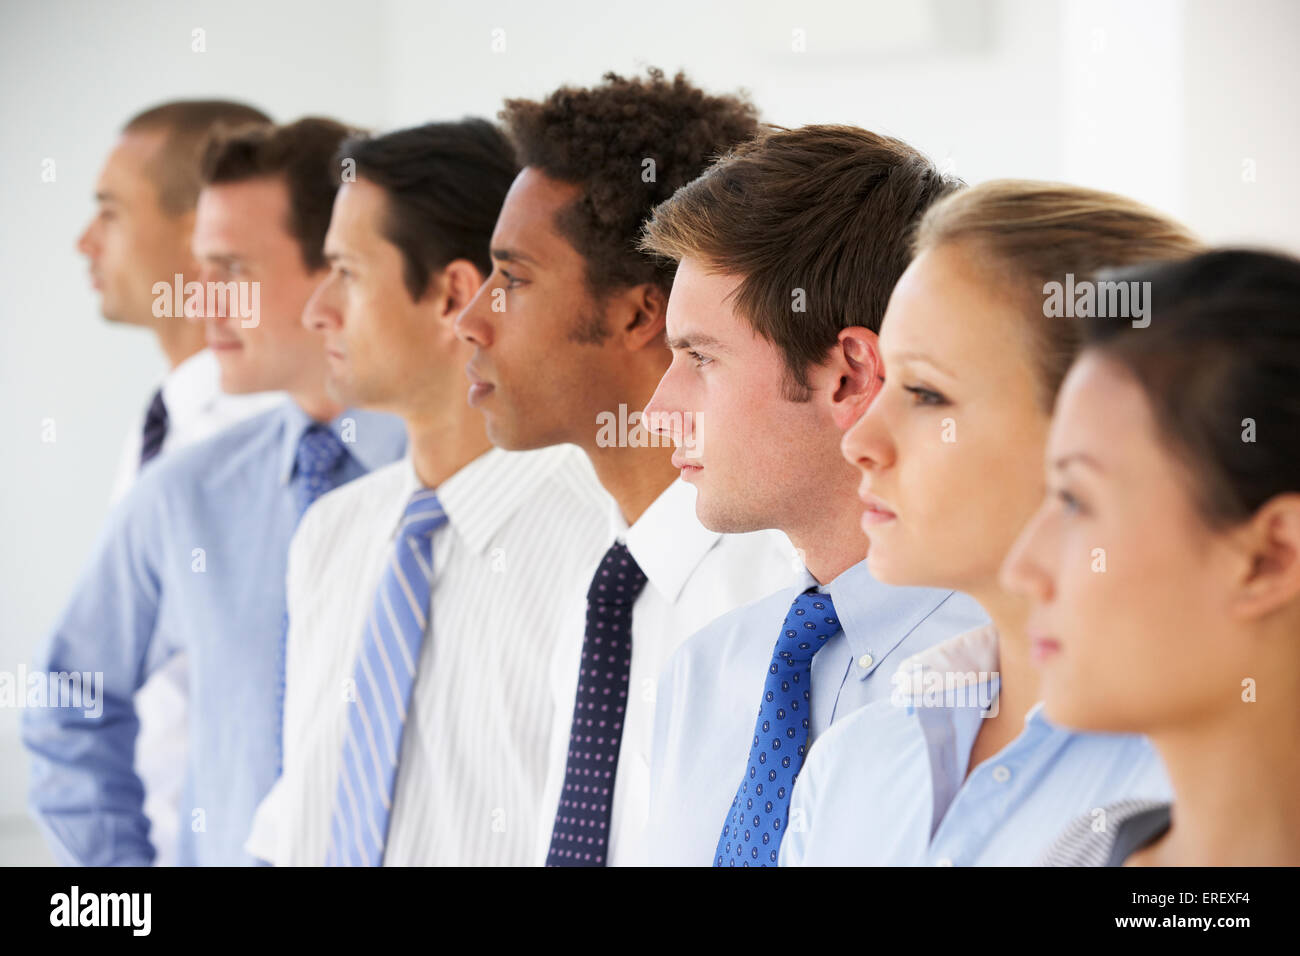 Line Of  Business People Looking Ahead Stock Photo